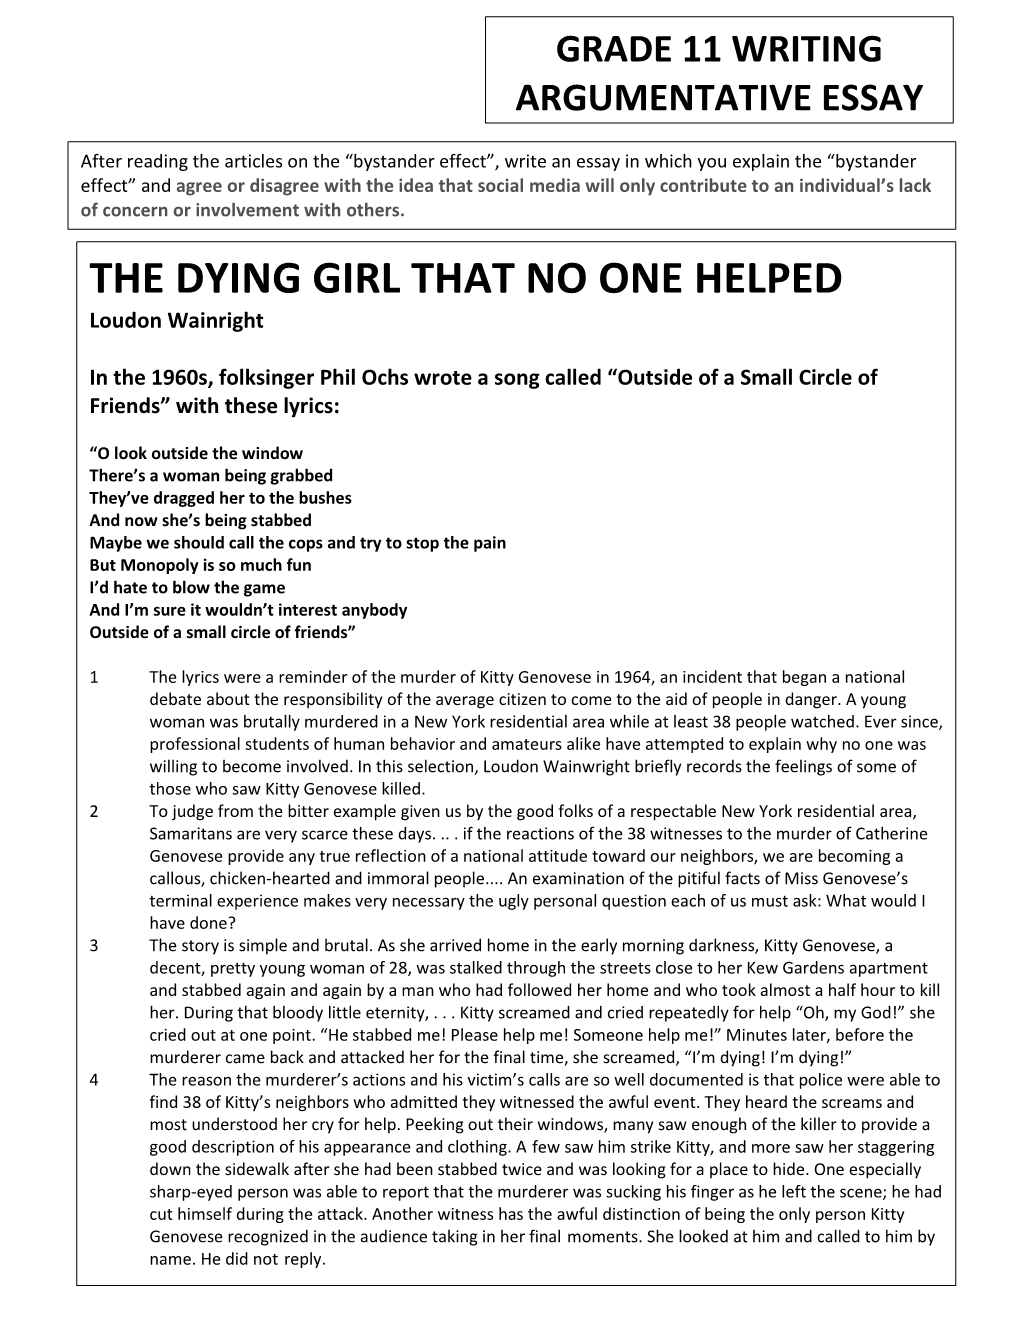 The Dying Girl That No One Helped